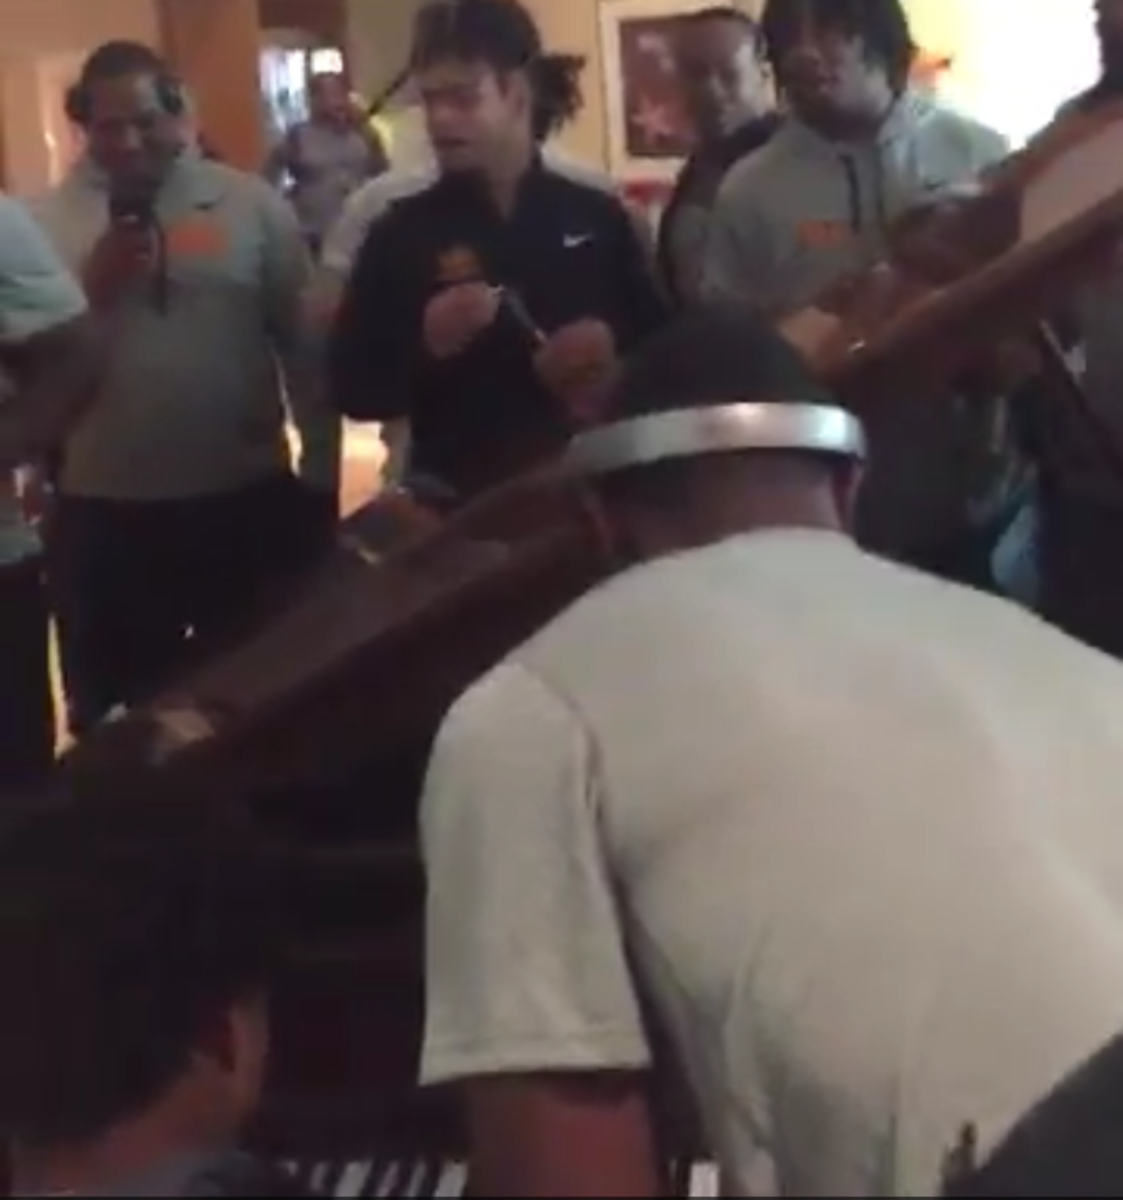 Tennessee players surround the piano for a performance of "Lean on Me".